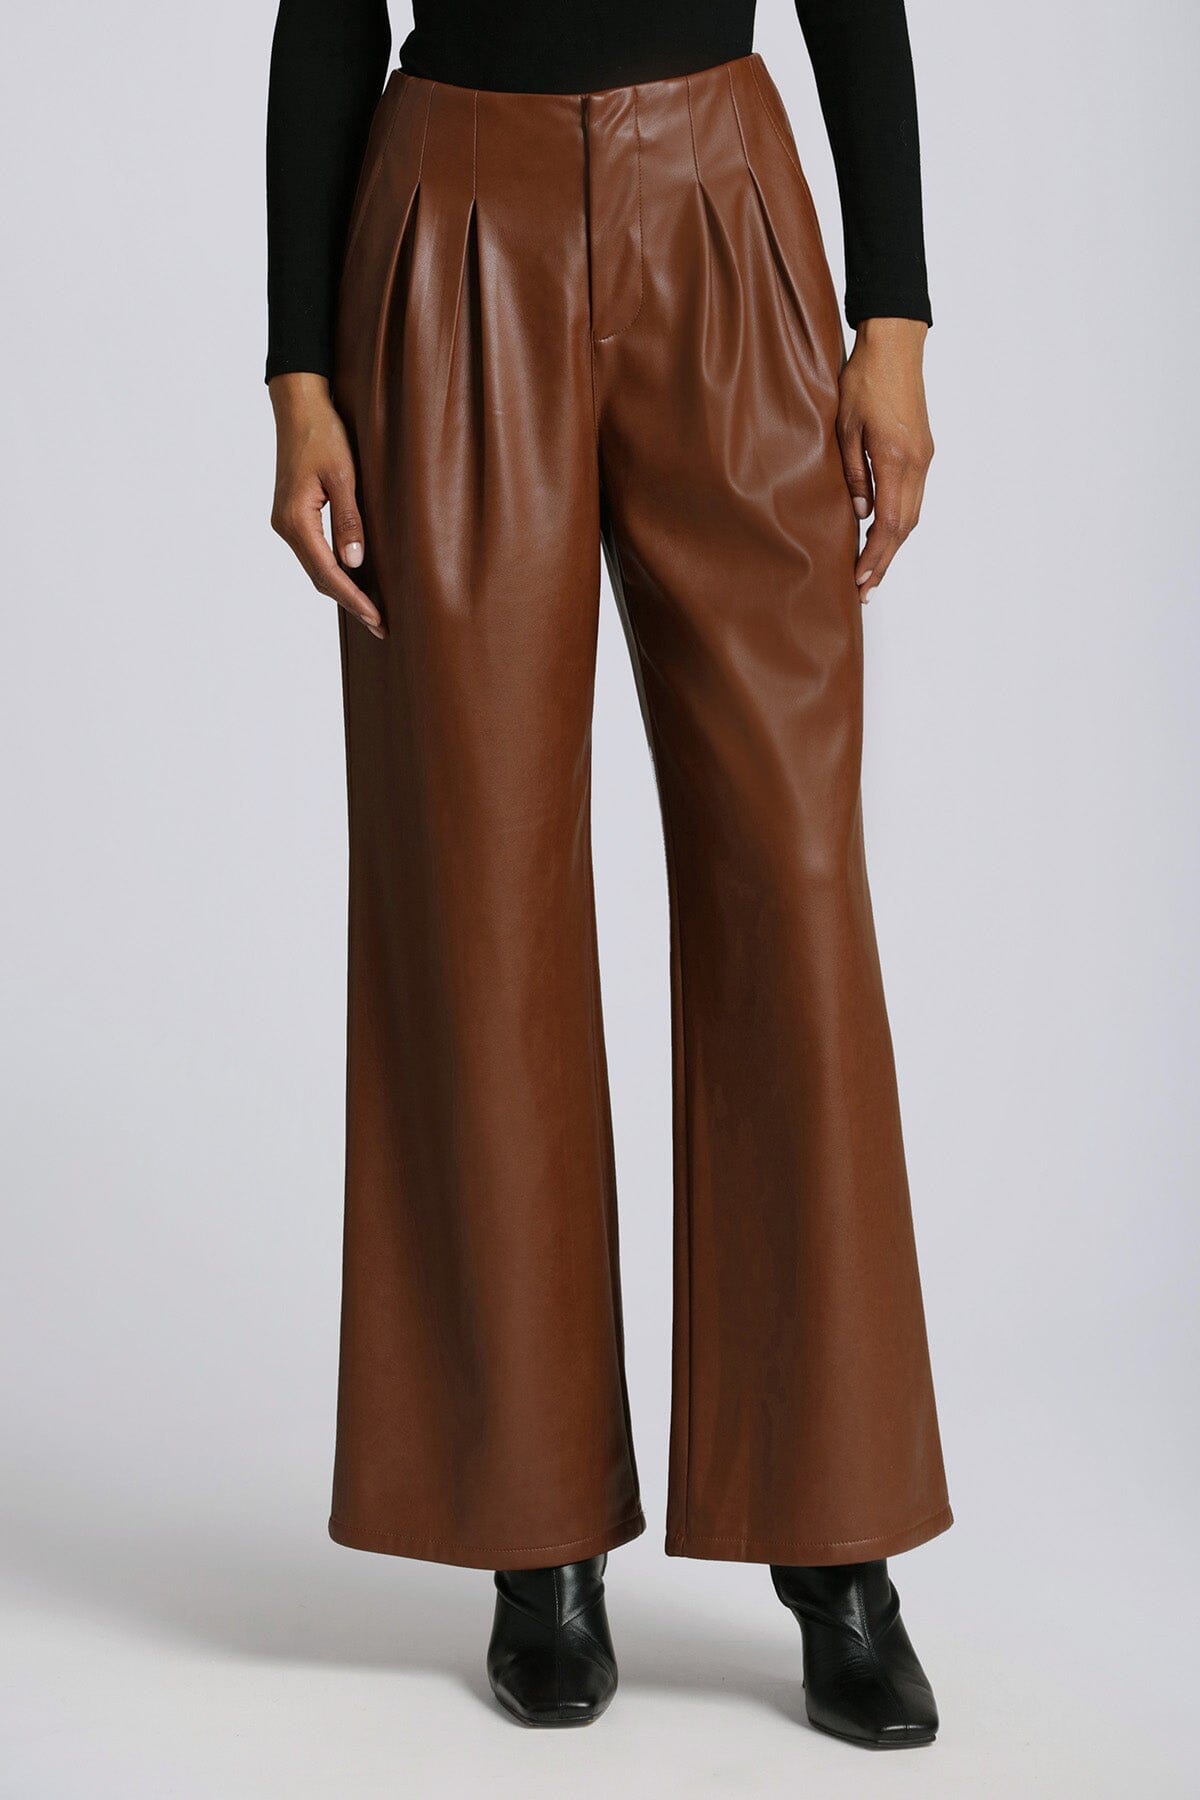 Sienna brown faux ever leather pleated wide leg trouser pant - figure flattering work appropriate trousers pants for women